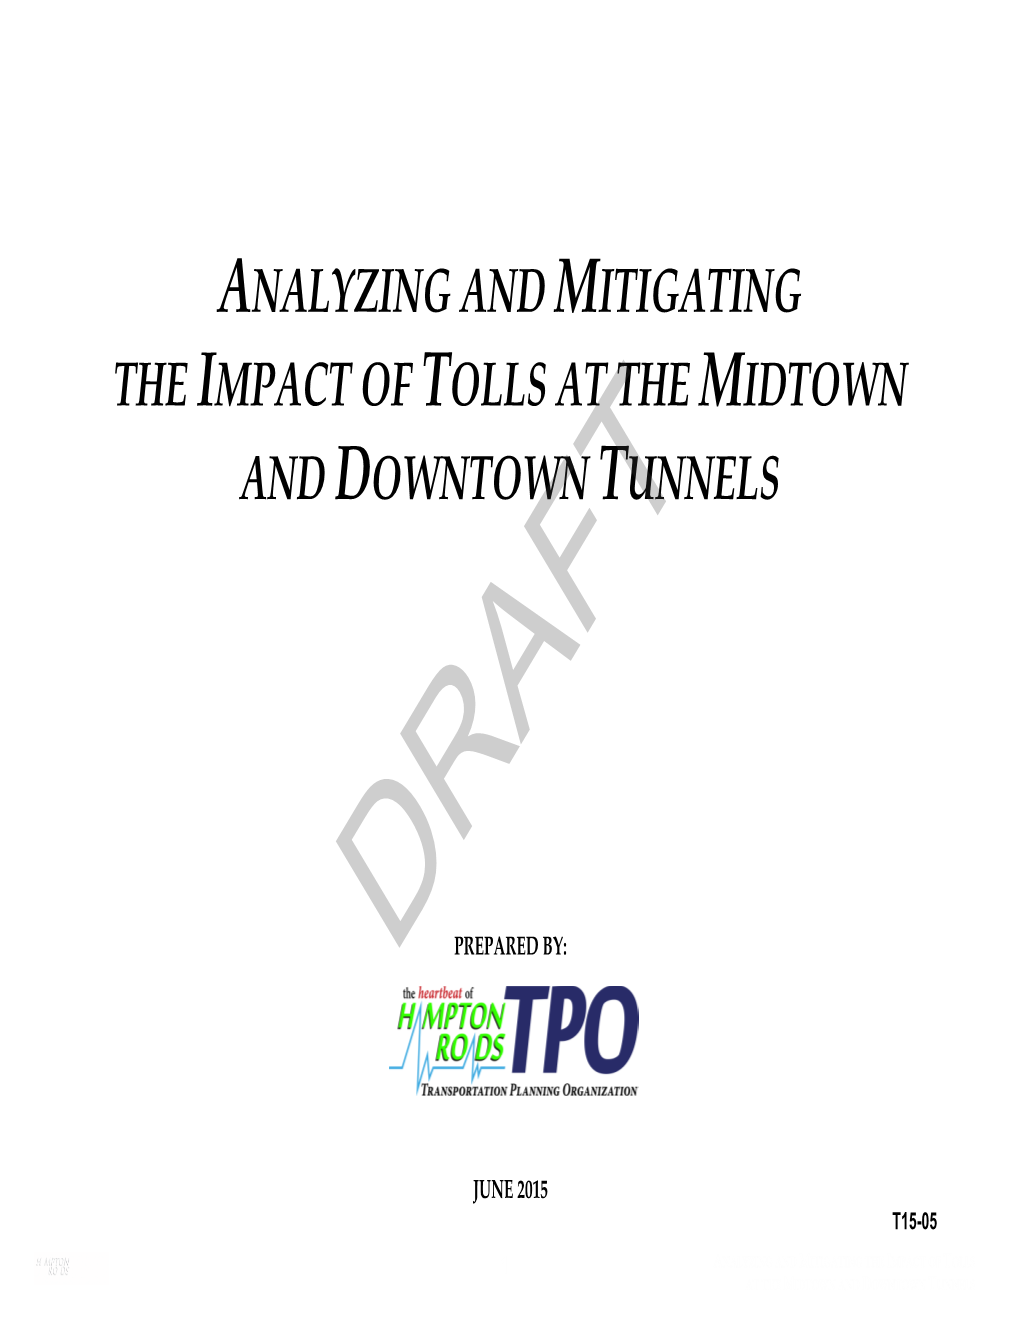 The Impact of Tolls at the Midtown and Downtown Tunnels